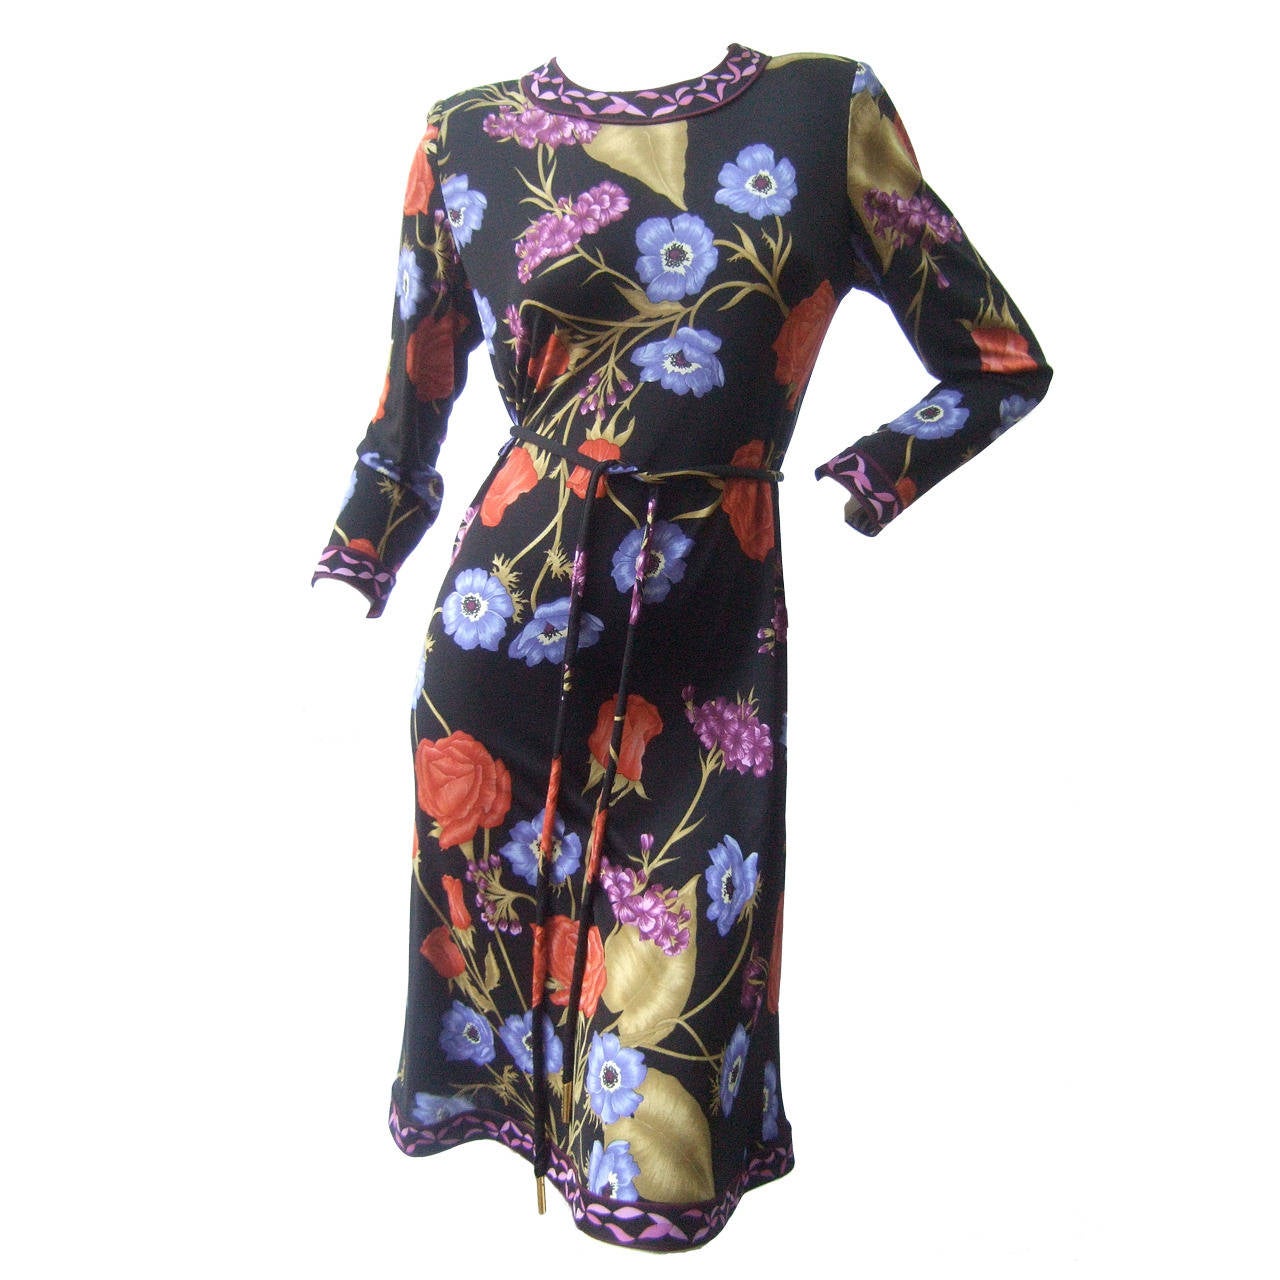 Averardo Bessi Silk Jersey Floral Print Dress Made in Italy US Size 4 ...